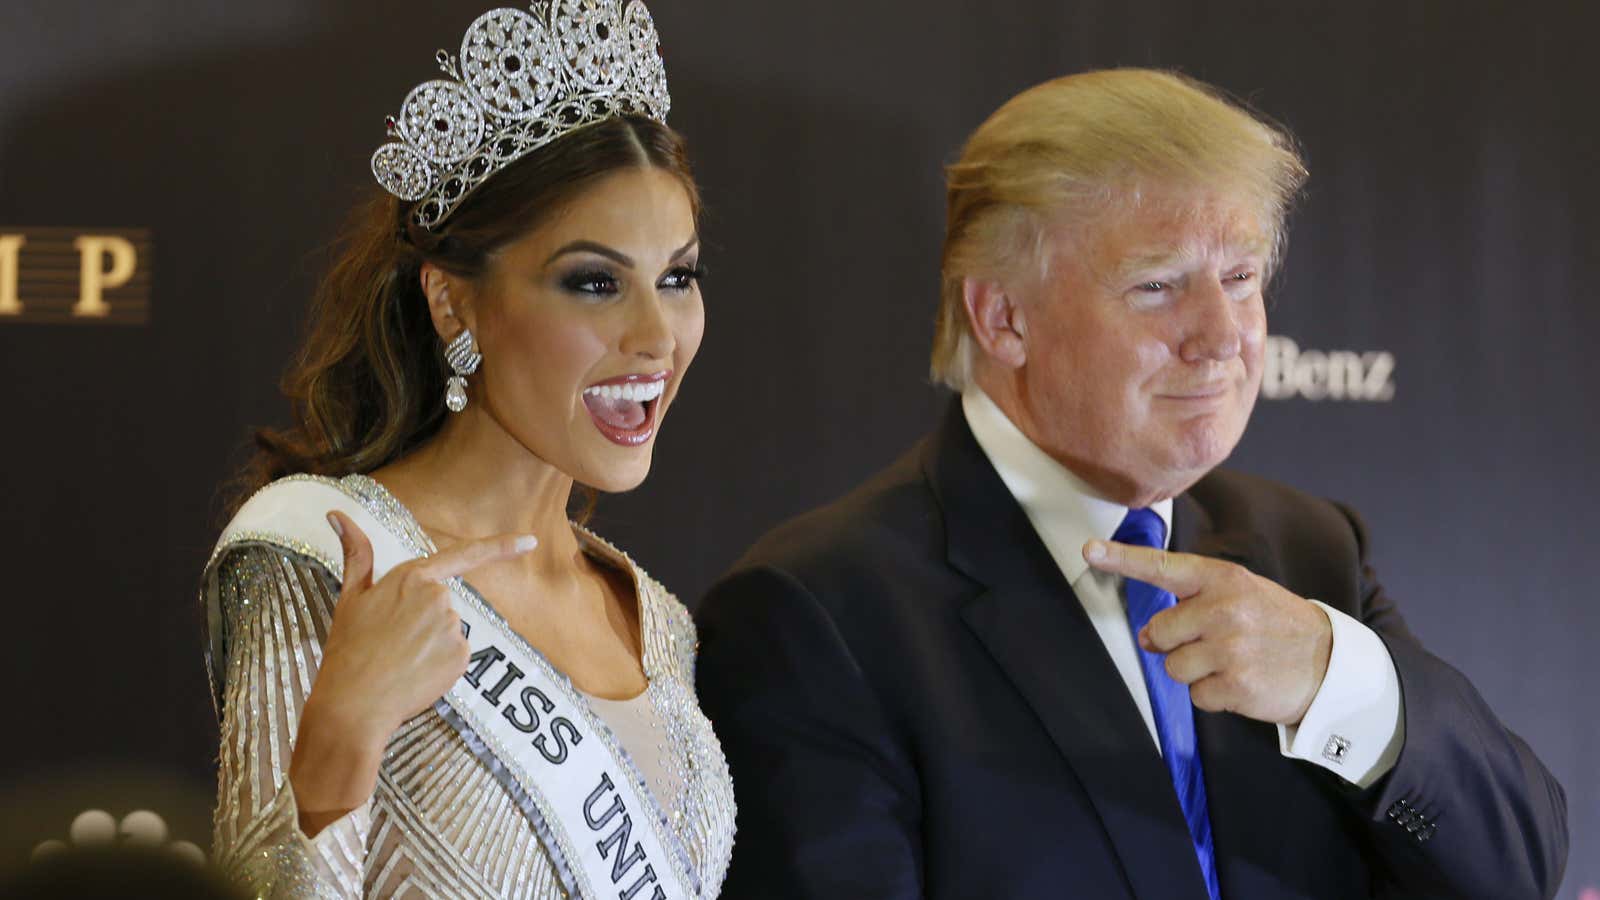 Trump and Miss Universe 2013 in Moscow.